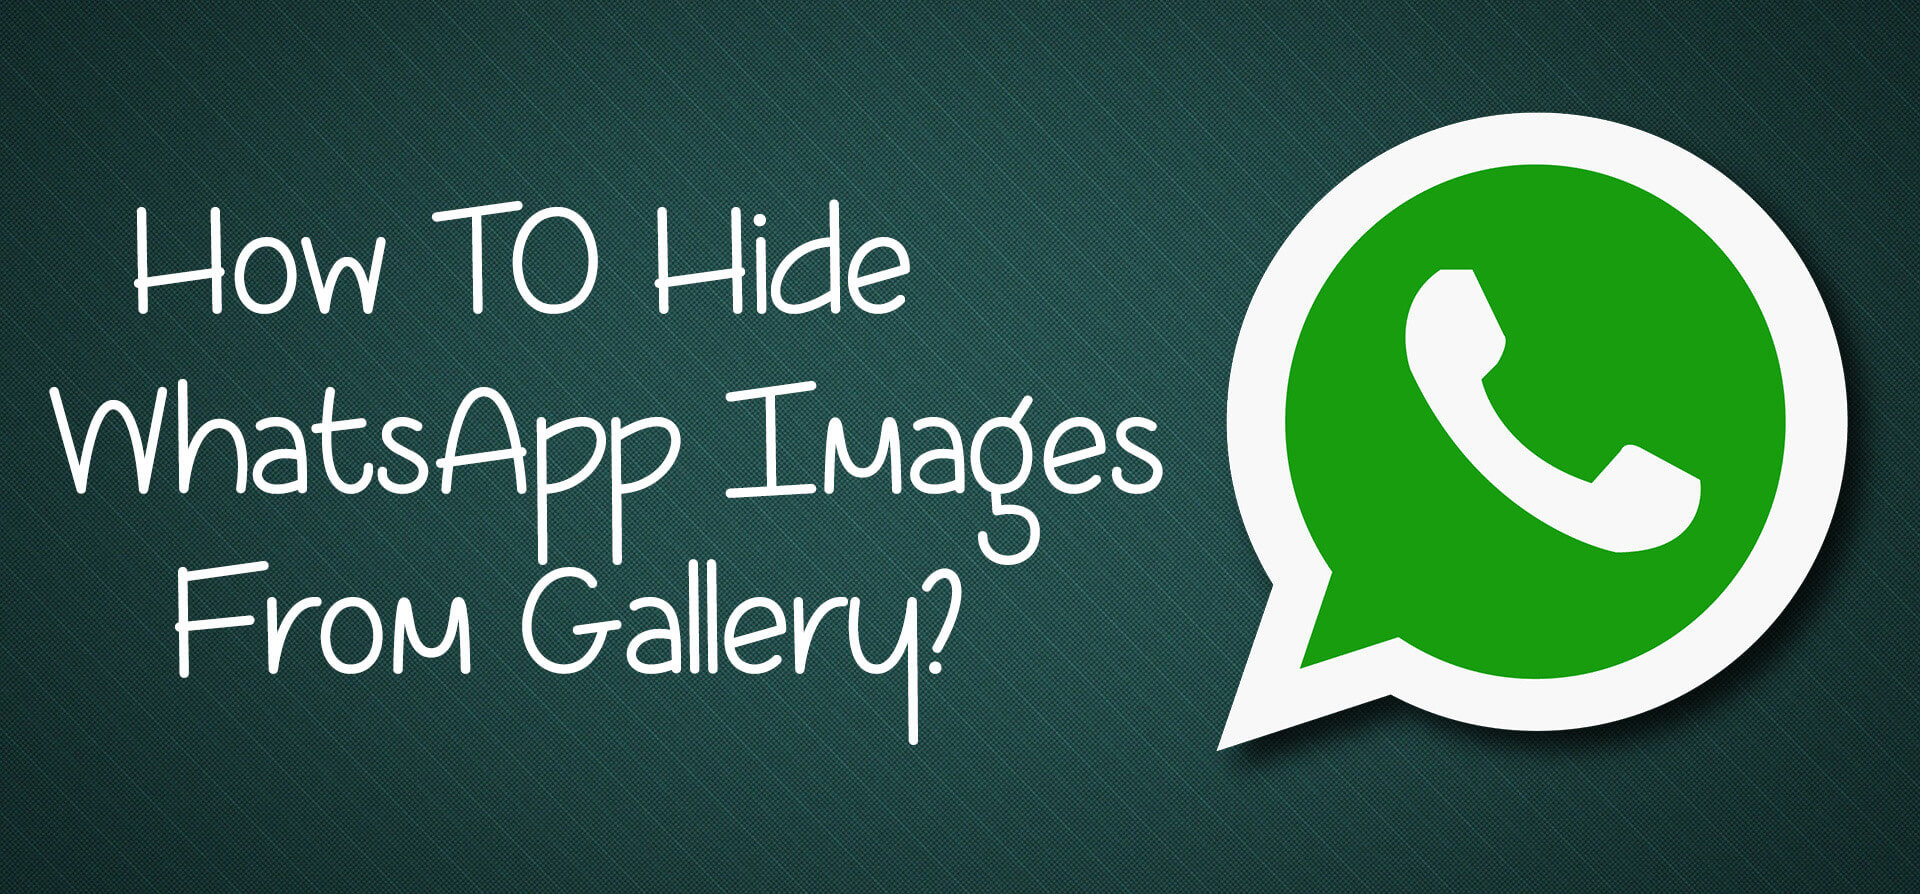 hide-whatsapp-images-from-gallery-in-android